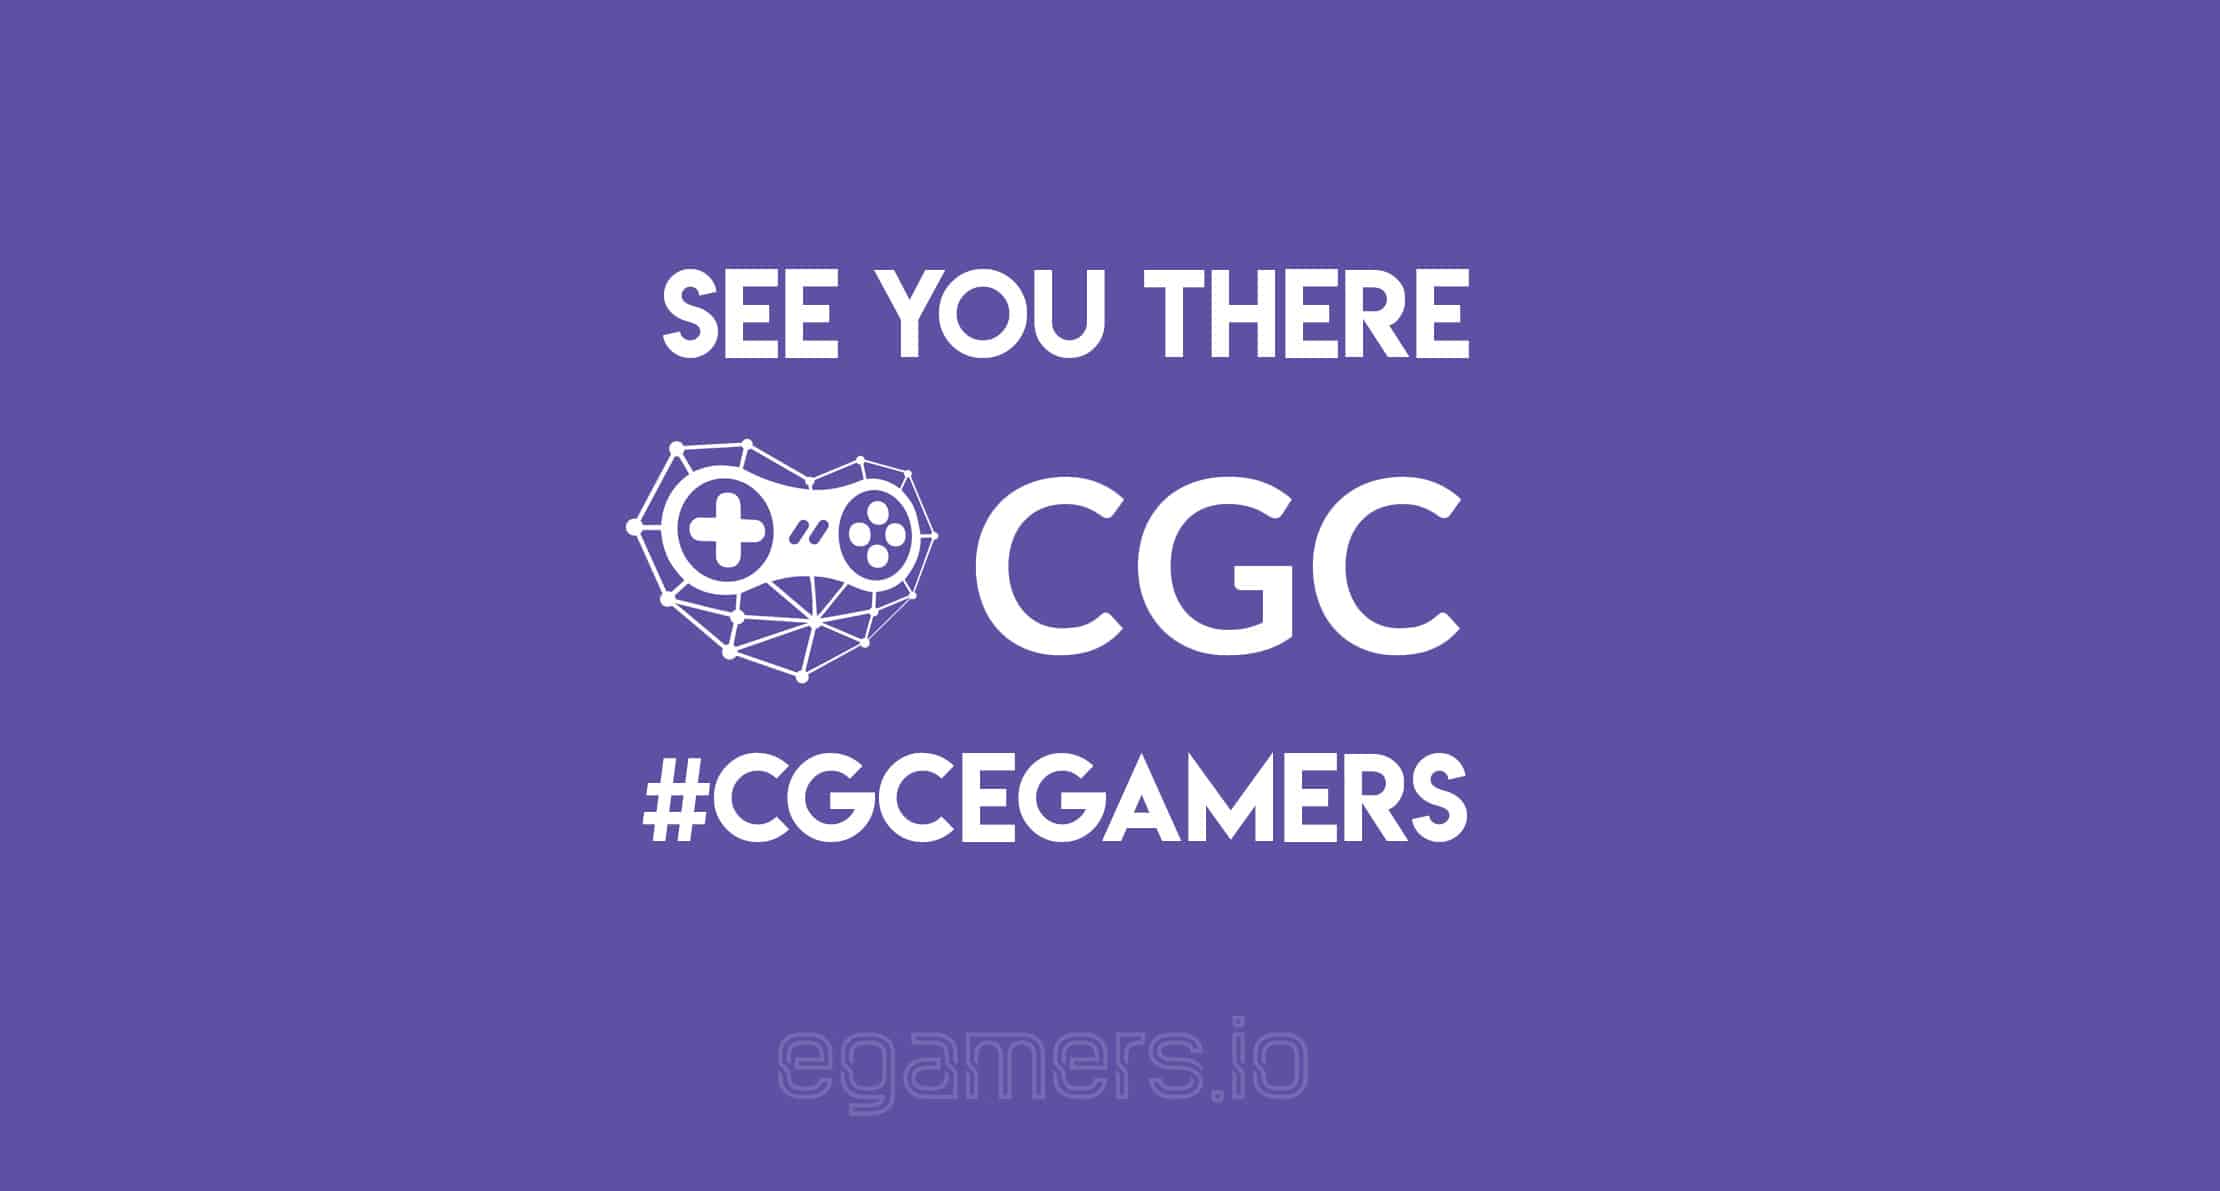 cgc egamers blockchain It's an exciting day for us at egamers.io as we are packing our stuff to travel in Ukraine for the CGC (Crypto Games Conference) on 10 and 11th of October.